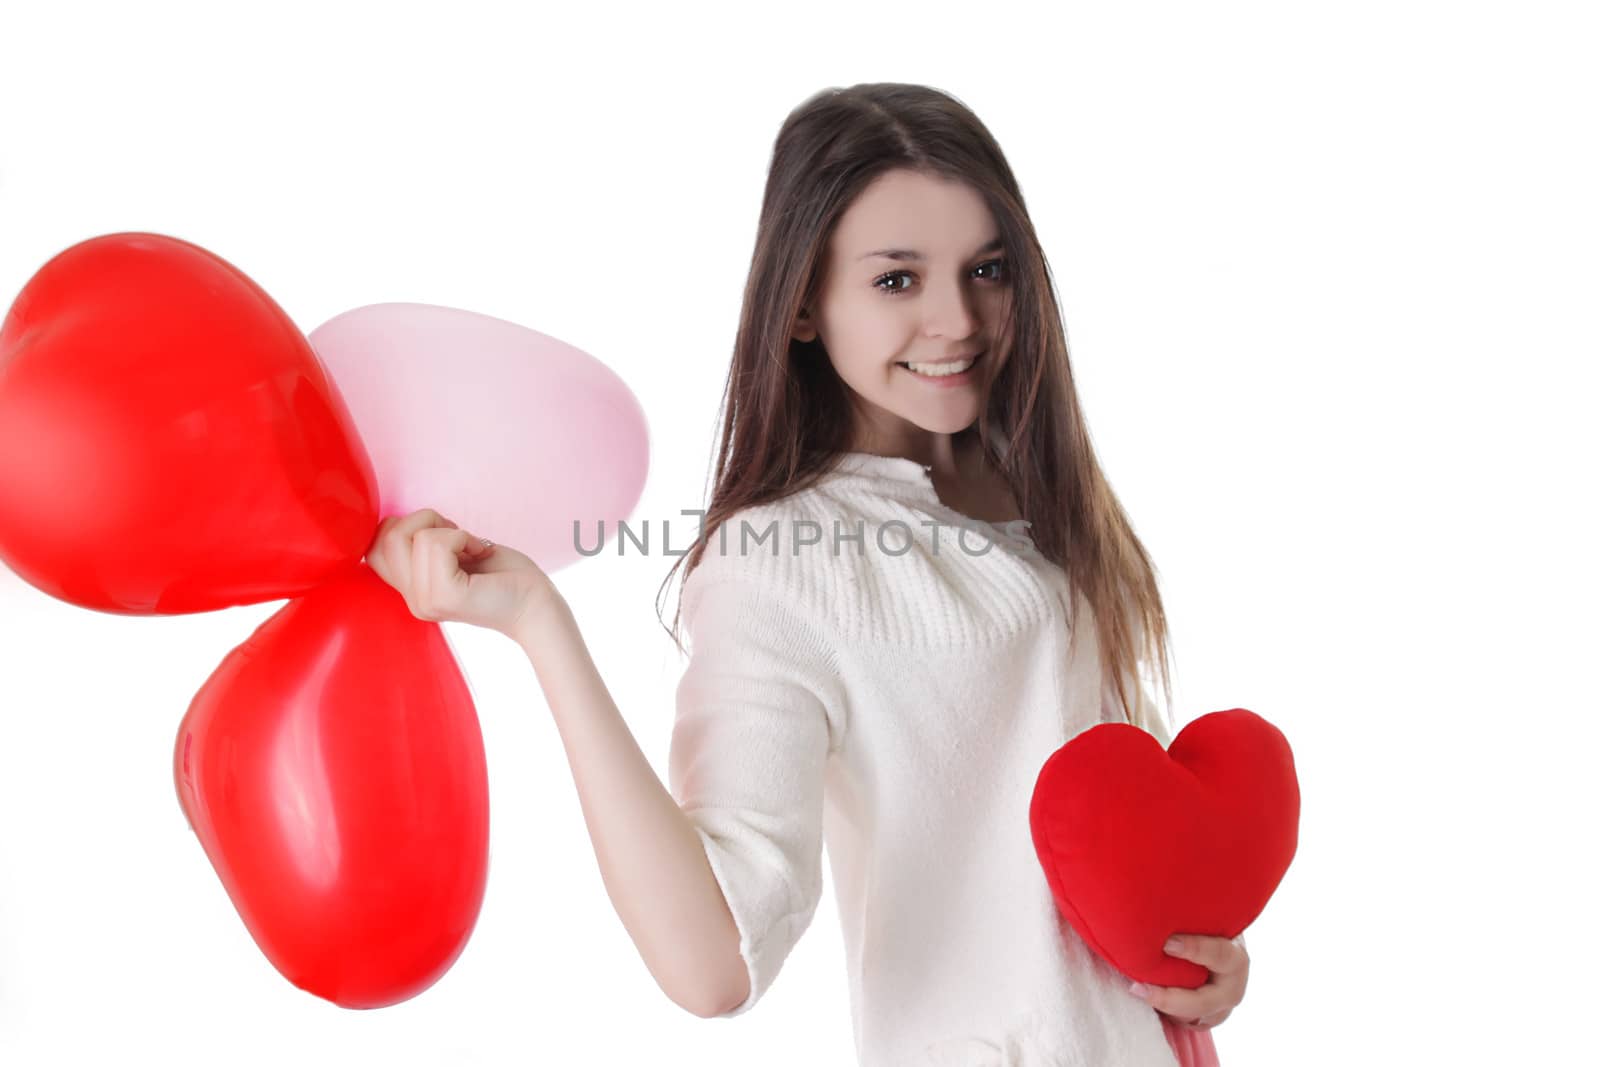 Smiling young girl with balloons and plush heart over white